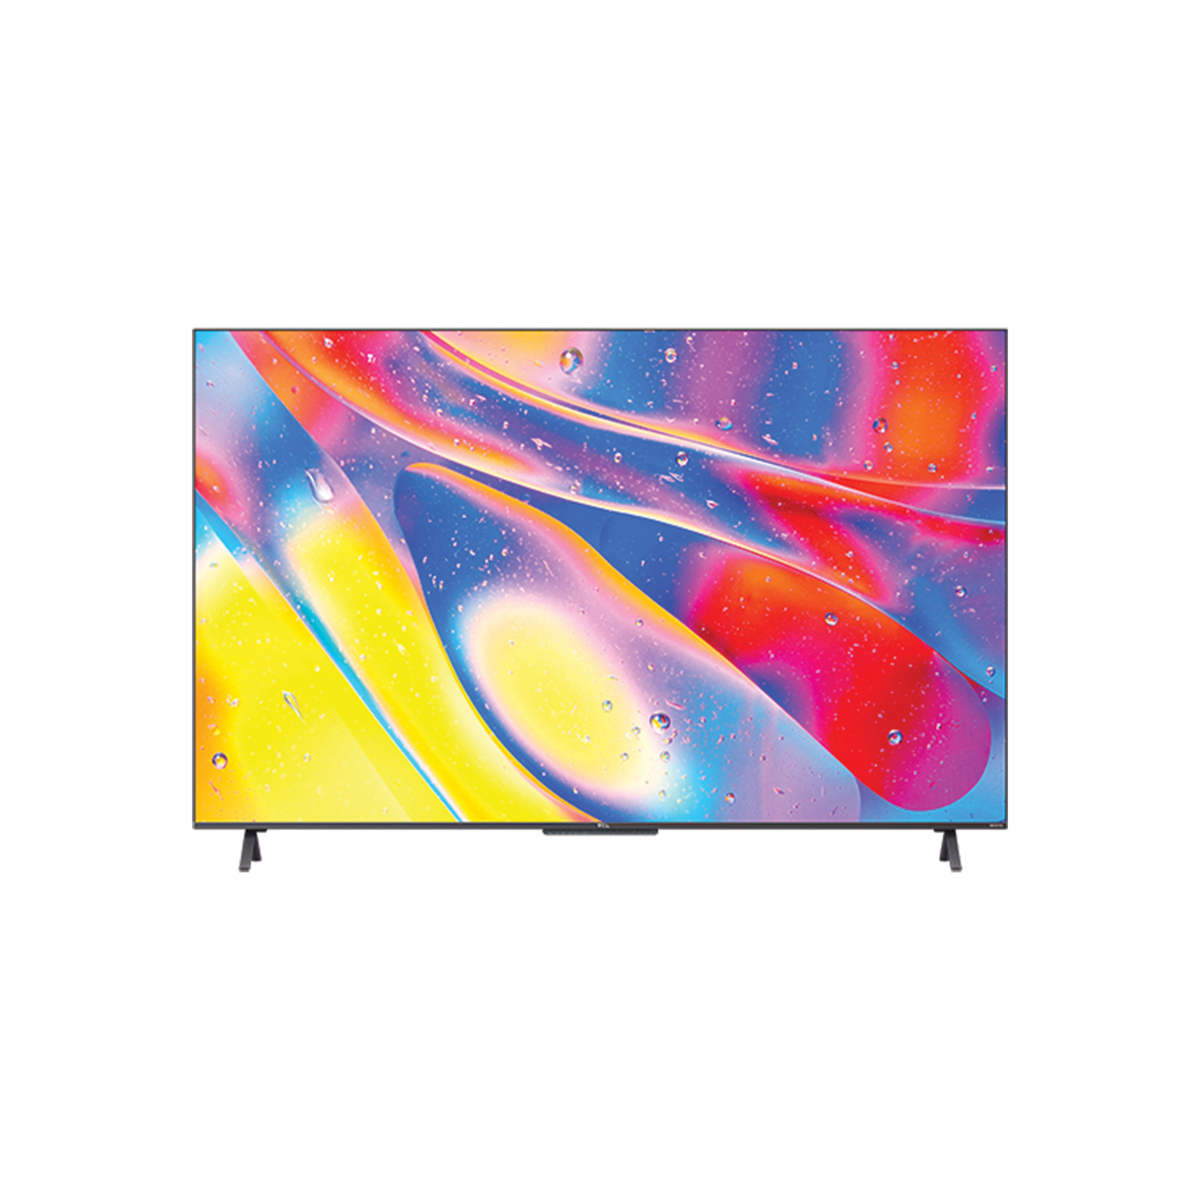 TCL QLED UHD Android Smart LED TV 50C725 50"